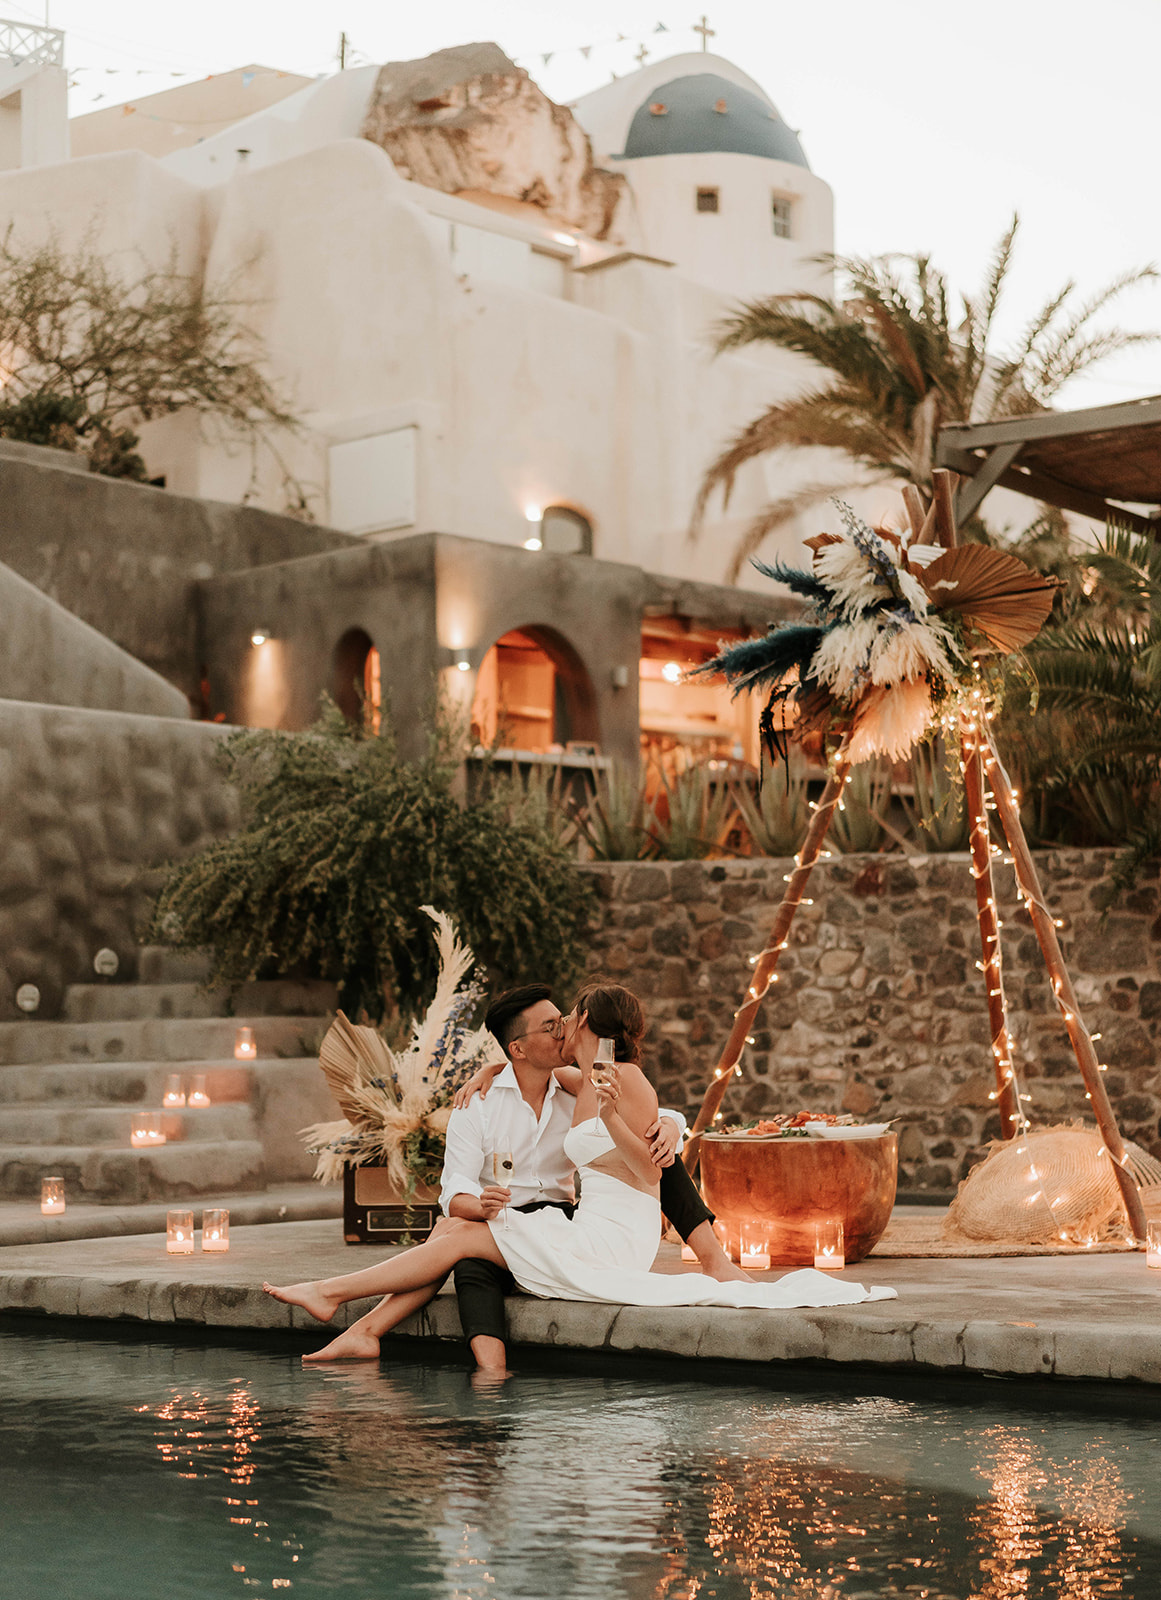  A couple who eloped in Santorini enjoy their evening meal by the pool with candles